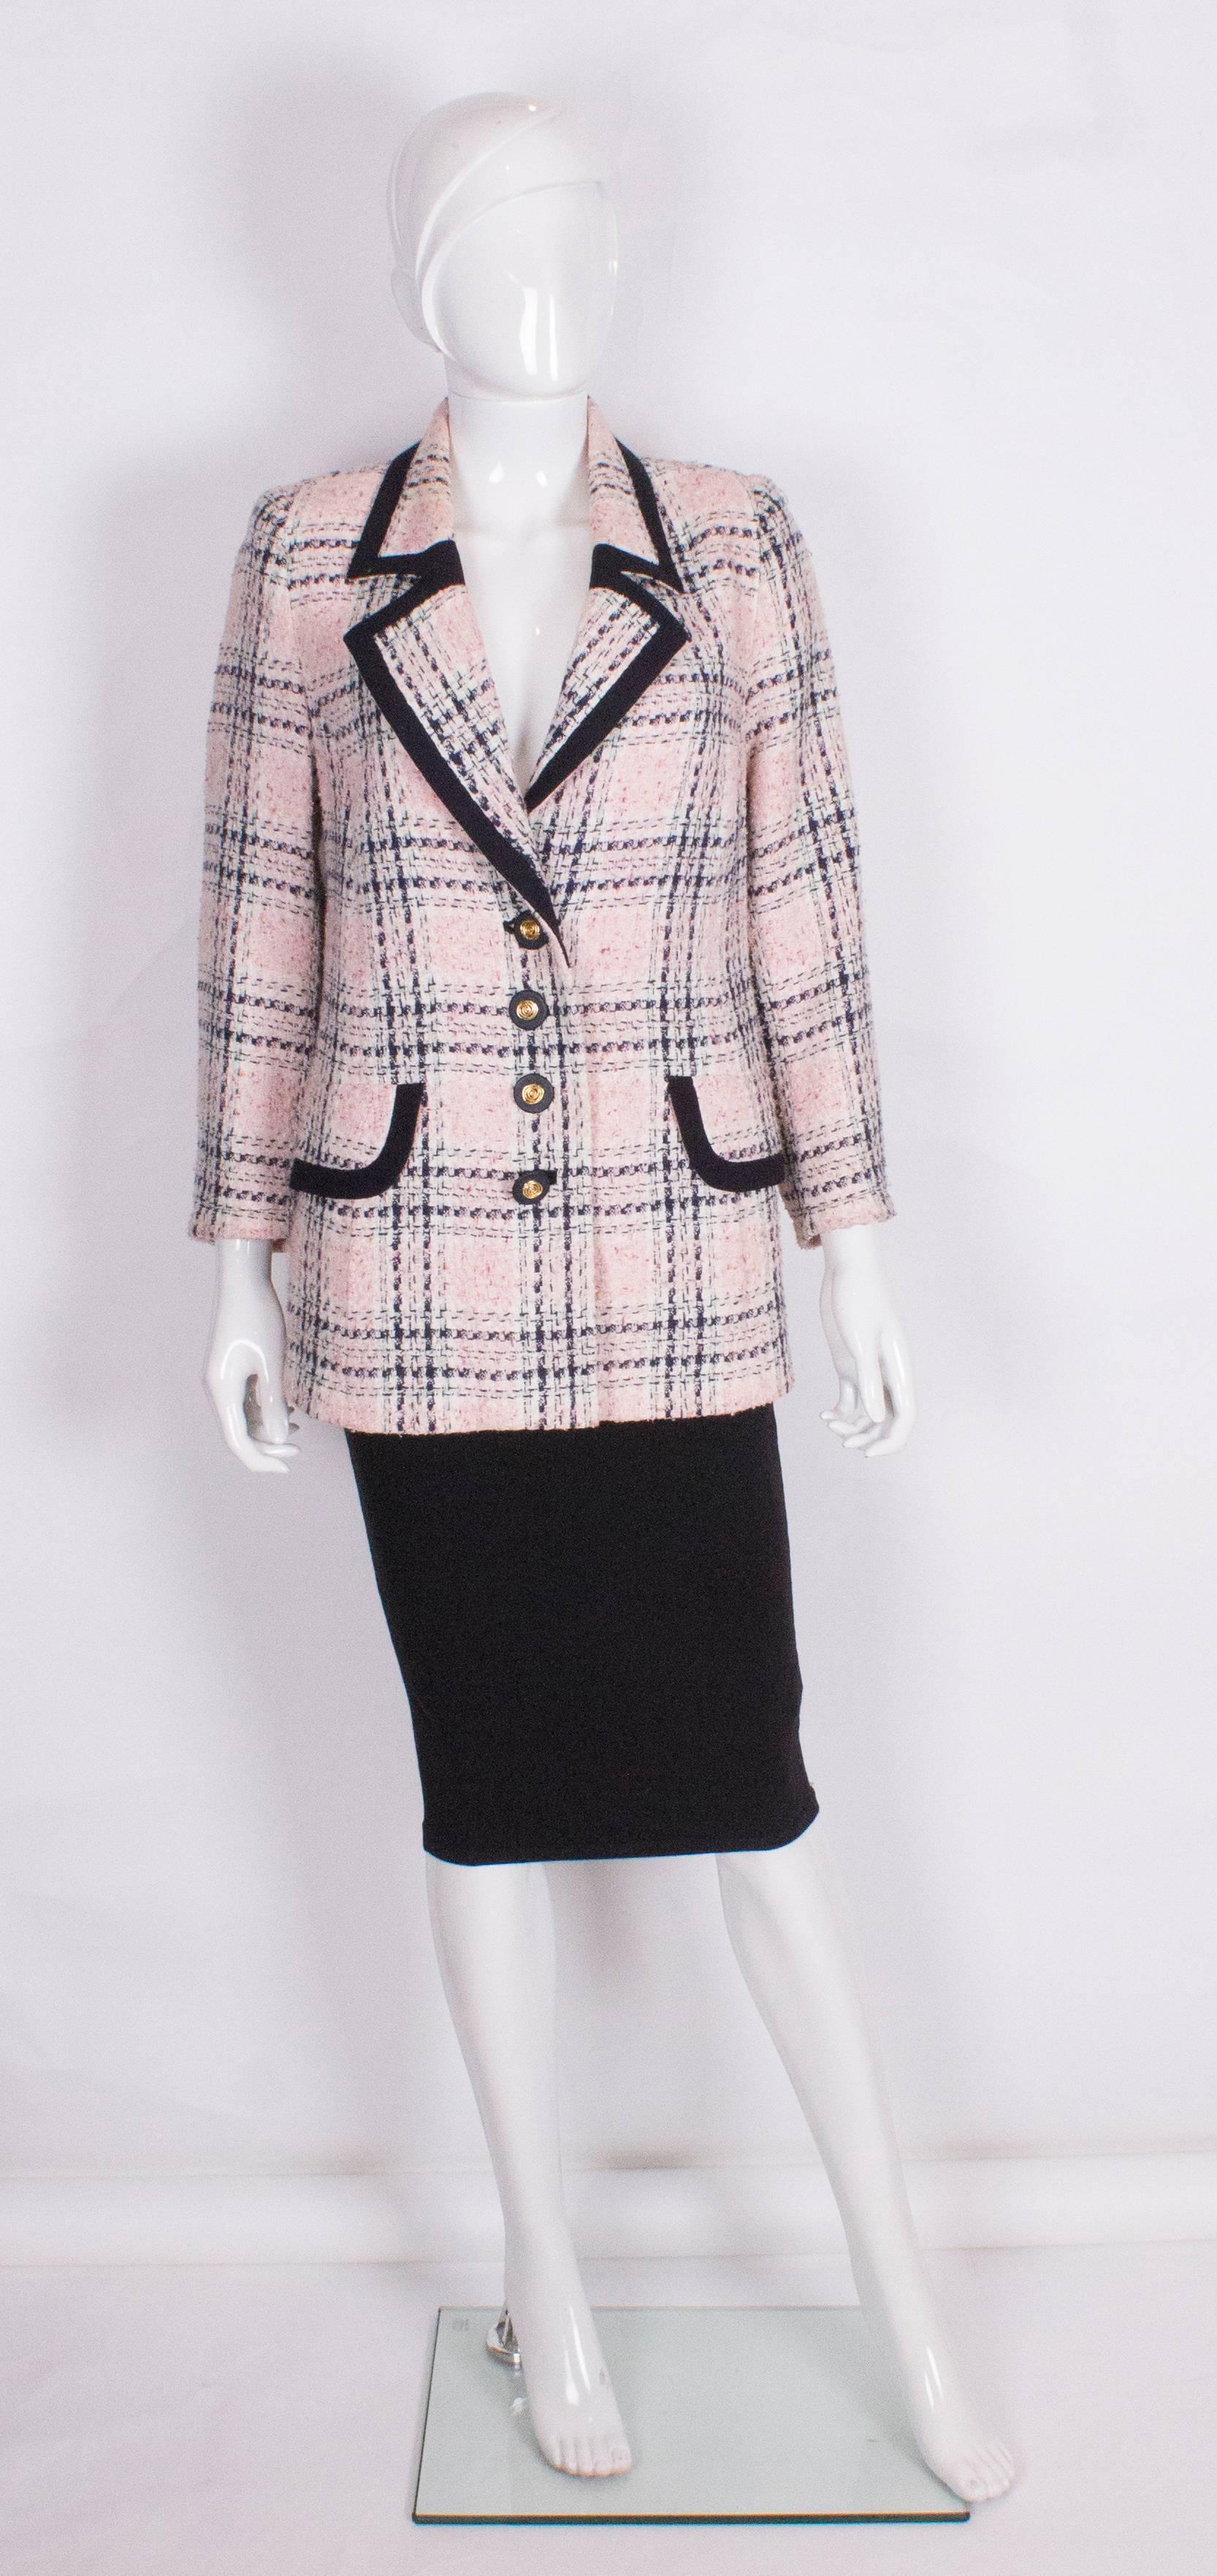 A chic vintage jacket by Hardy Amies. The jacket is a pink, cream and blue tweed like mix, with a v neckline, 4 button central opening and 2 faux pockets. It is fully lined.